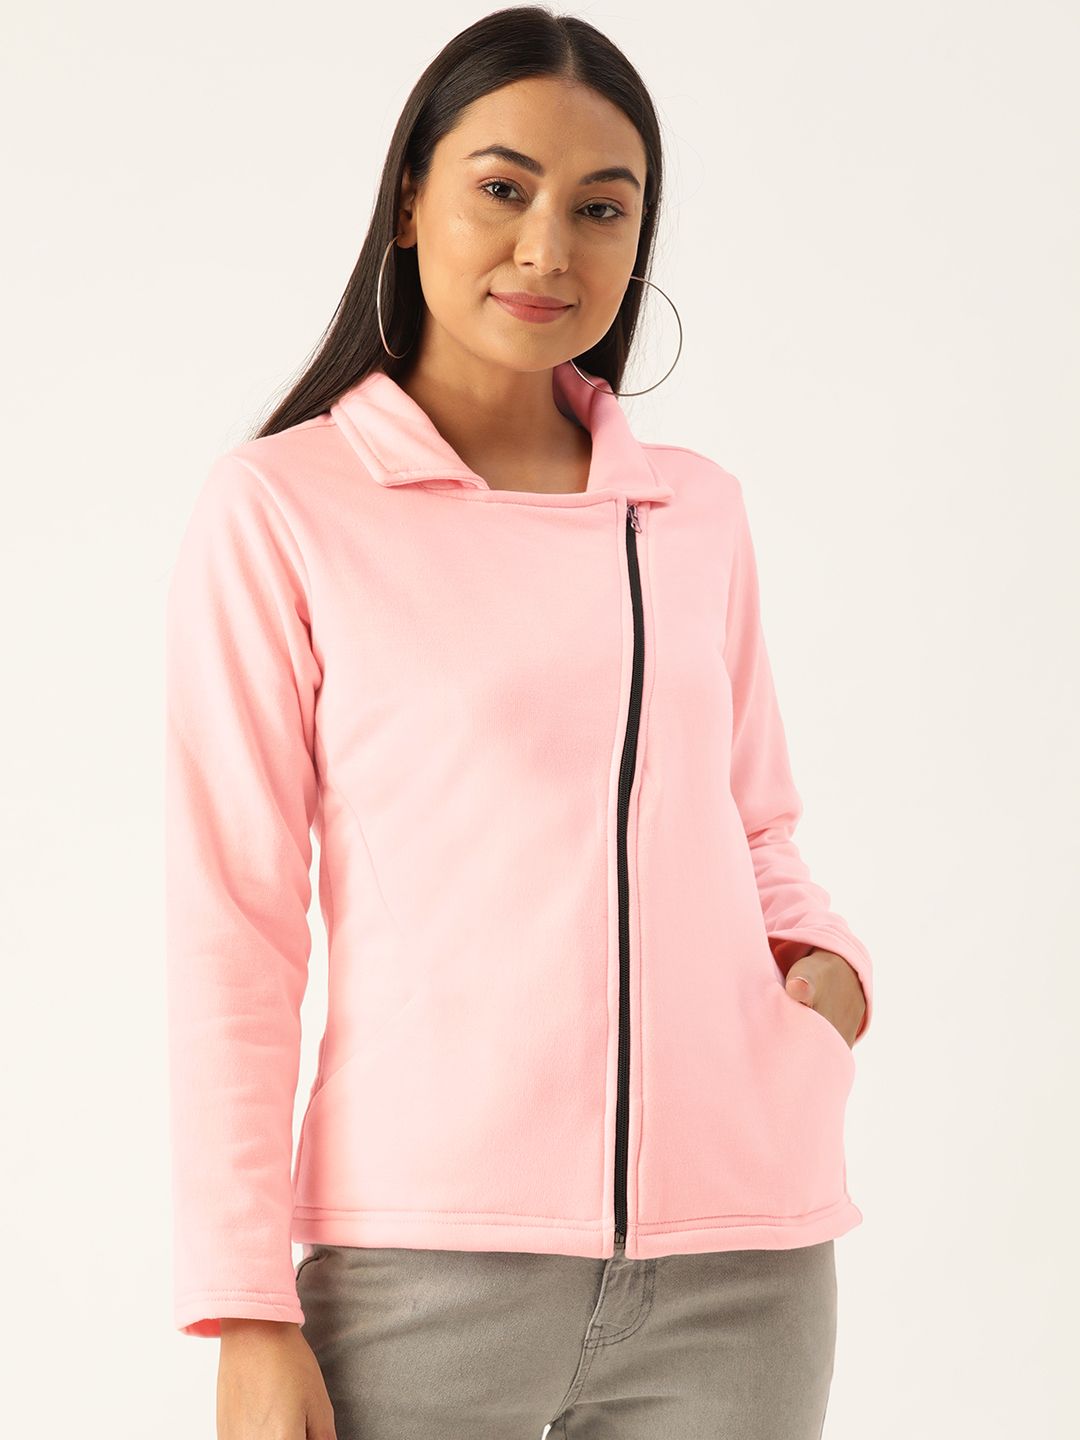 Belle Fille Pink Solid Tailored Jacket Price in India